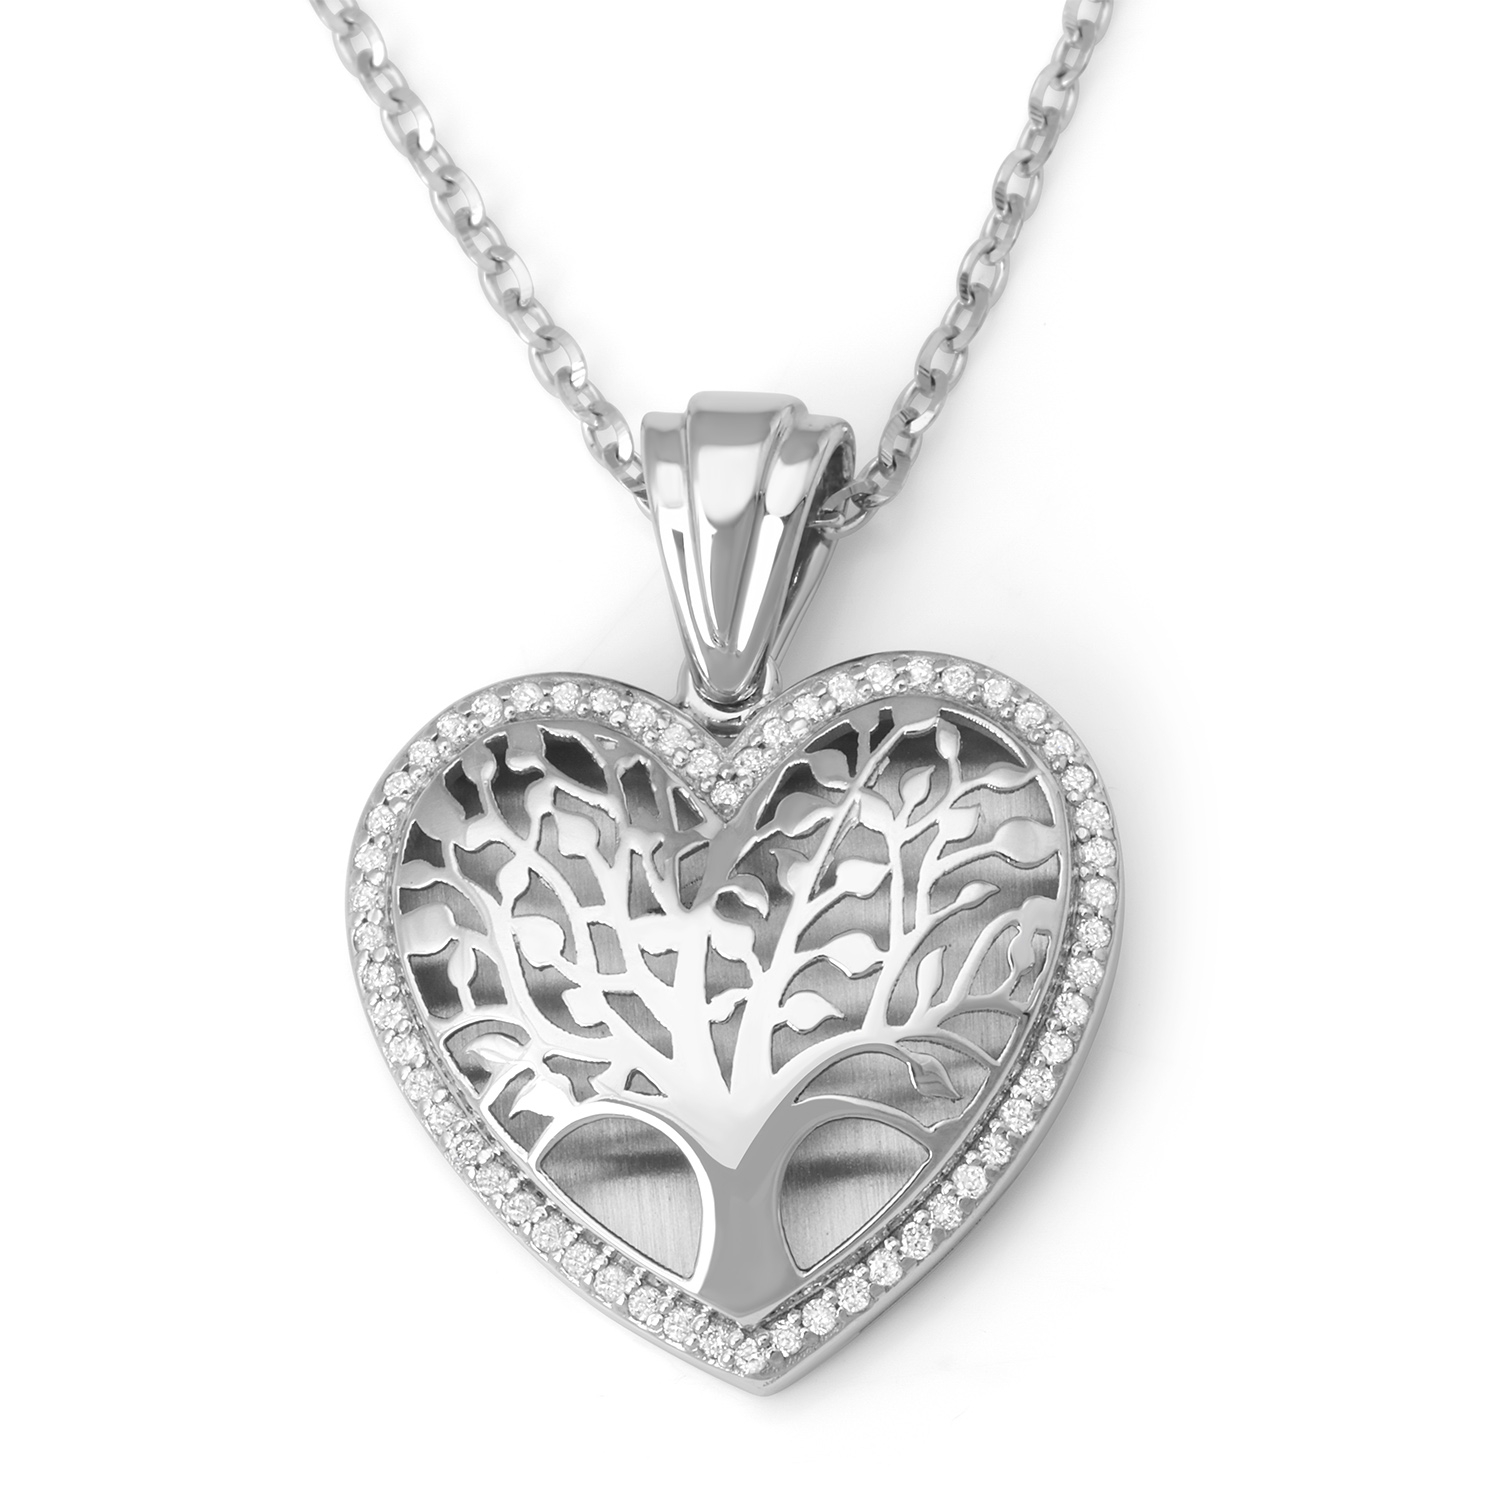 14K White Gold Leafy Tree of Life Heart Pendant with Diamonds - 1